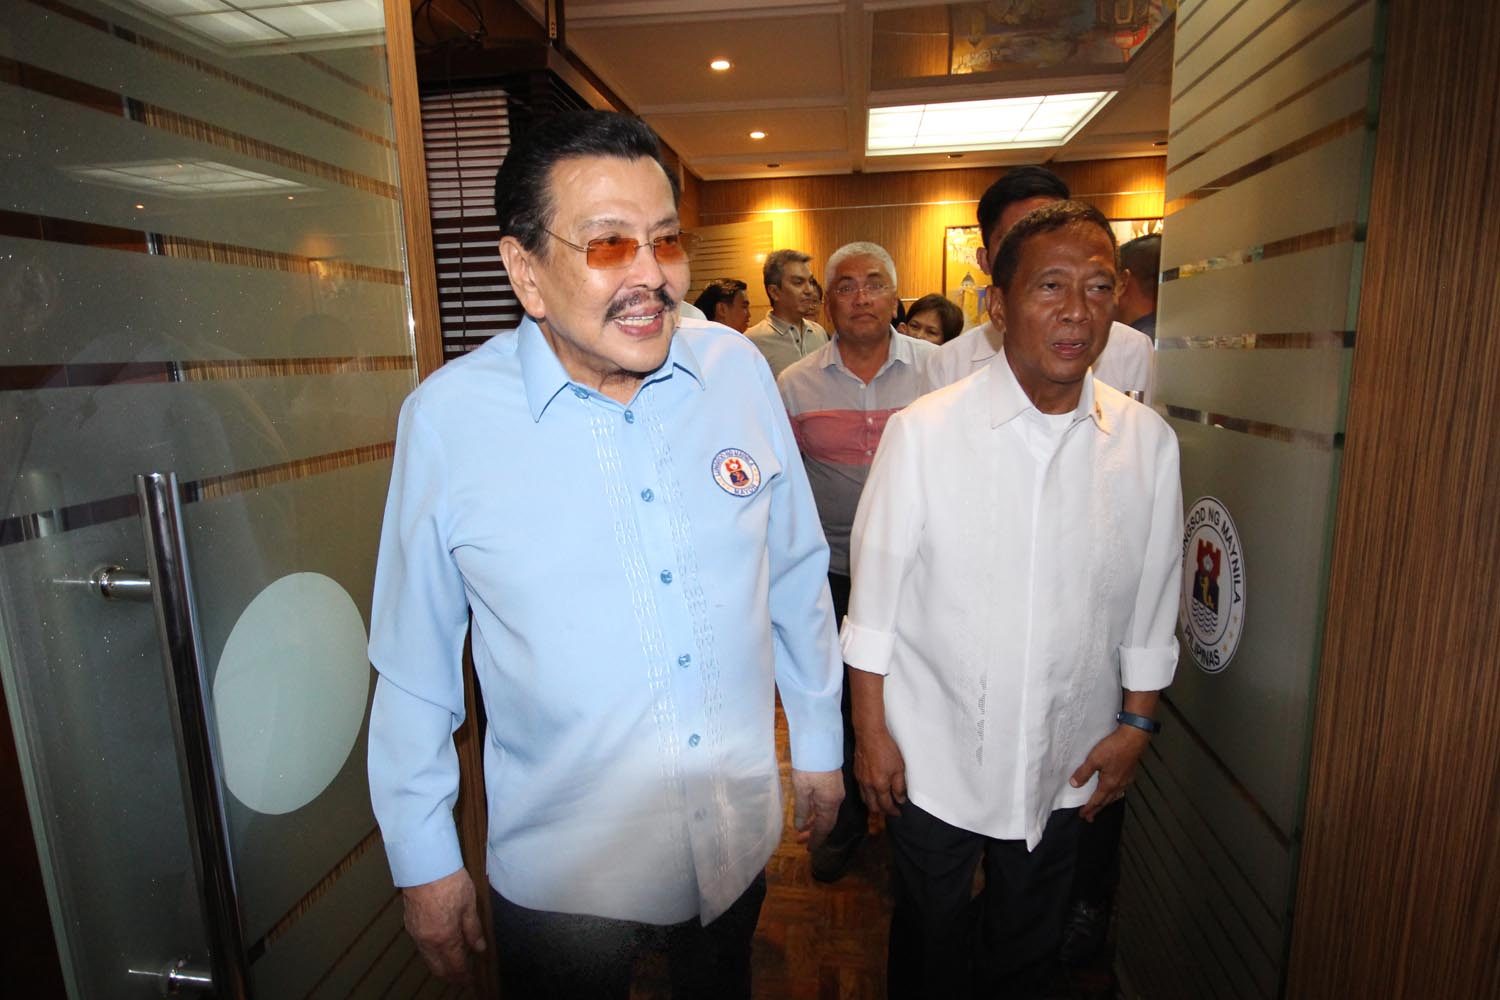 DID THEY TALK POLITICS? Vice President Jejomar Binay (right) says he had catching up to do with former President and now Manila Mayor Joseph Estrada, so he visited him at the City Hall on May 27, 2015, but does not disclose what they talked about. Photo byJoel Leporada/Rappler 